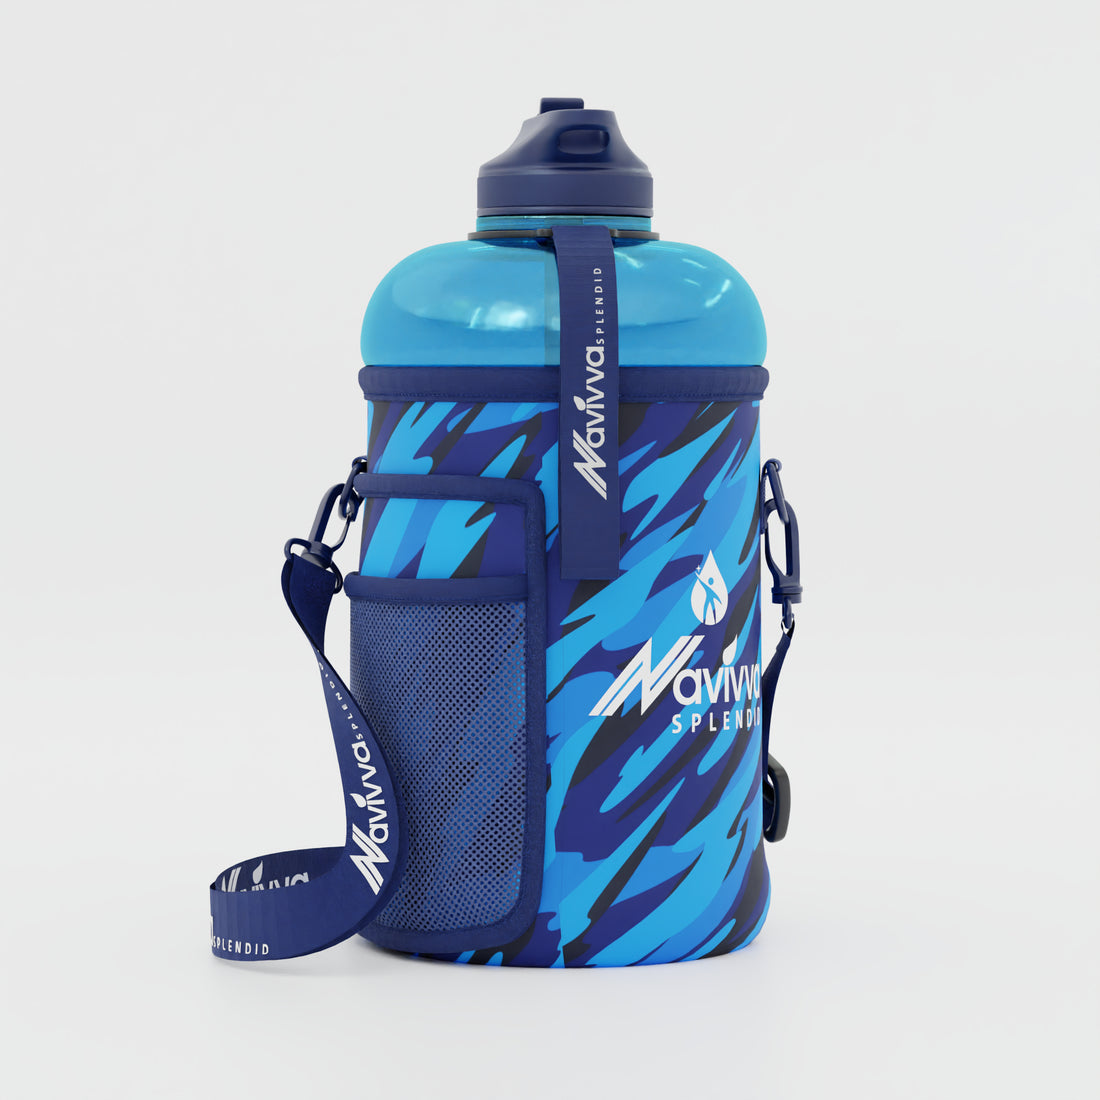 Blue Sports Water Bottle with a Sleeve